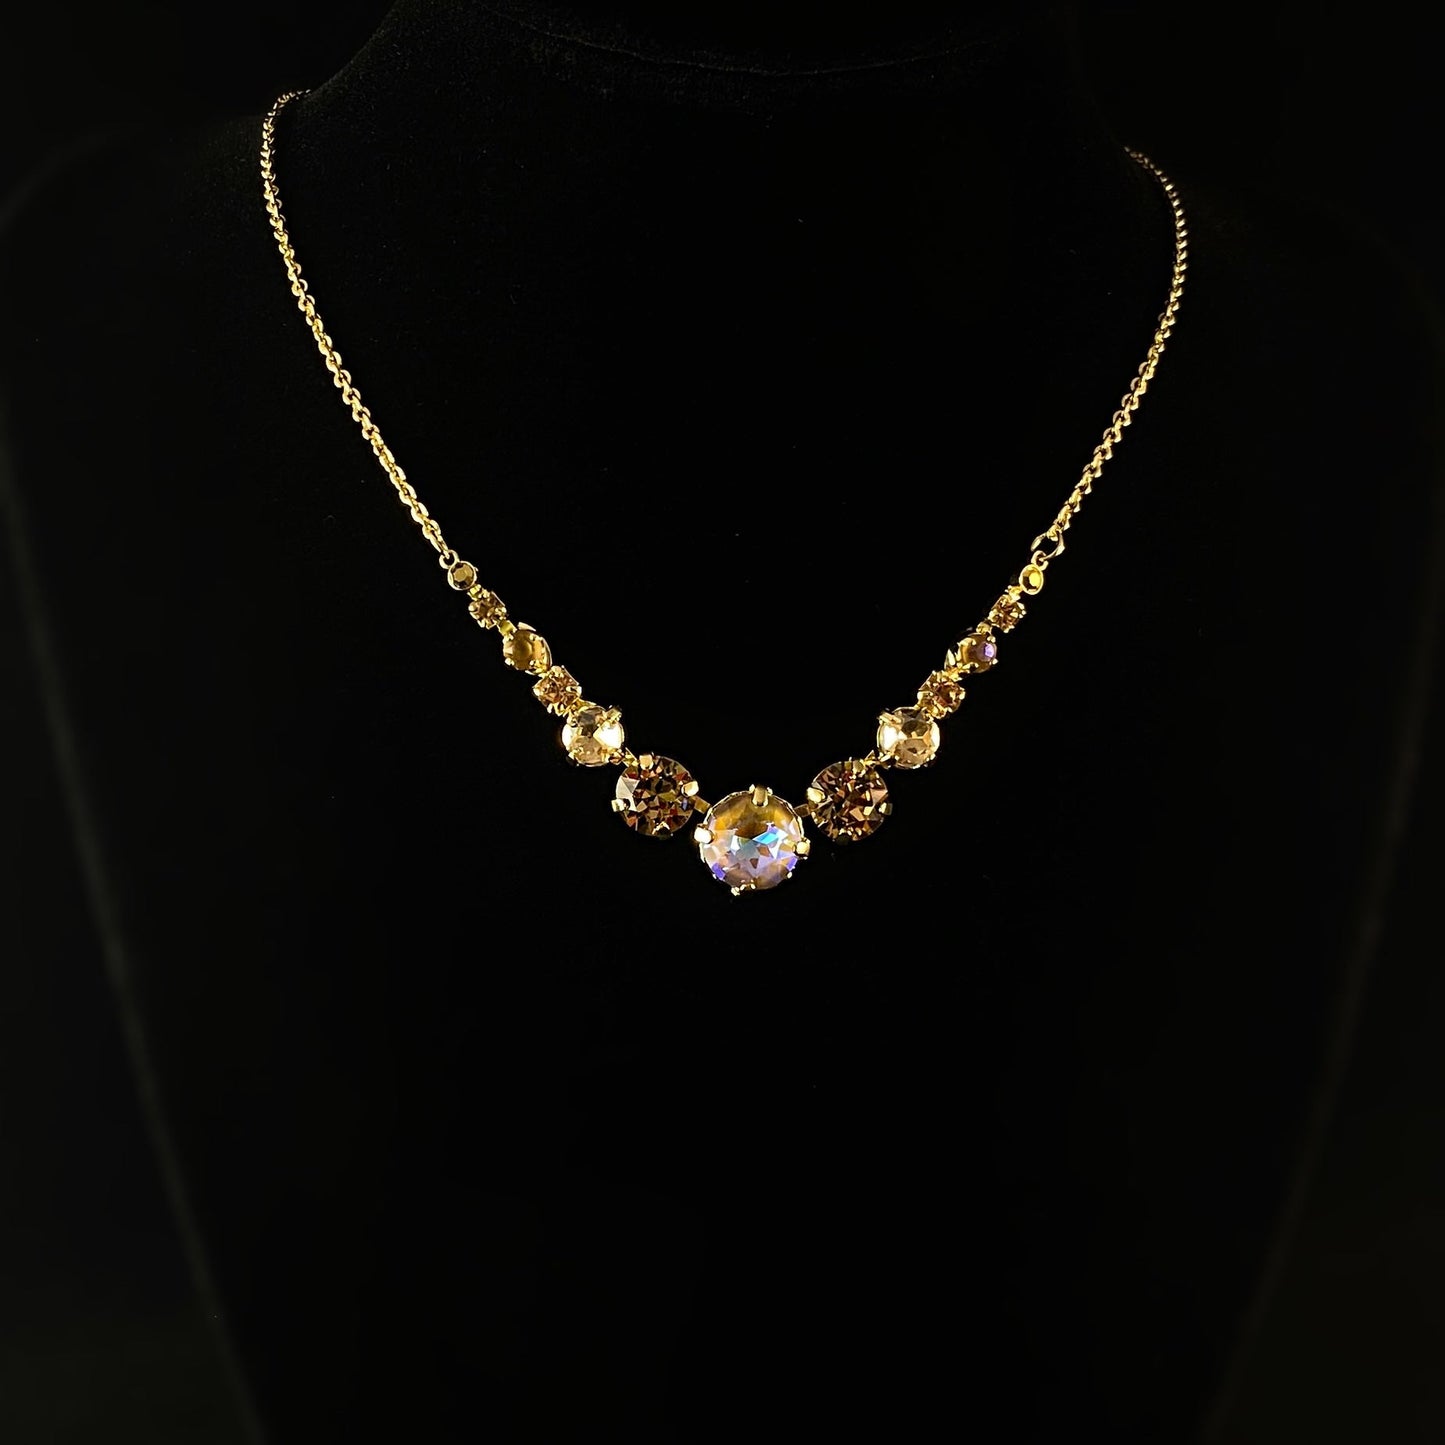 Multi-Colored Desert Shades Crystal Adjustable Gold Necklace